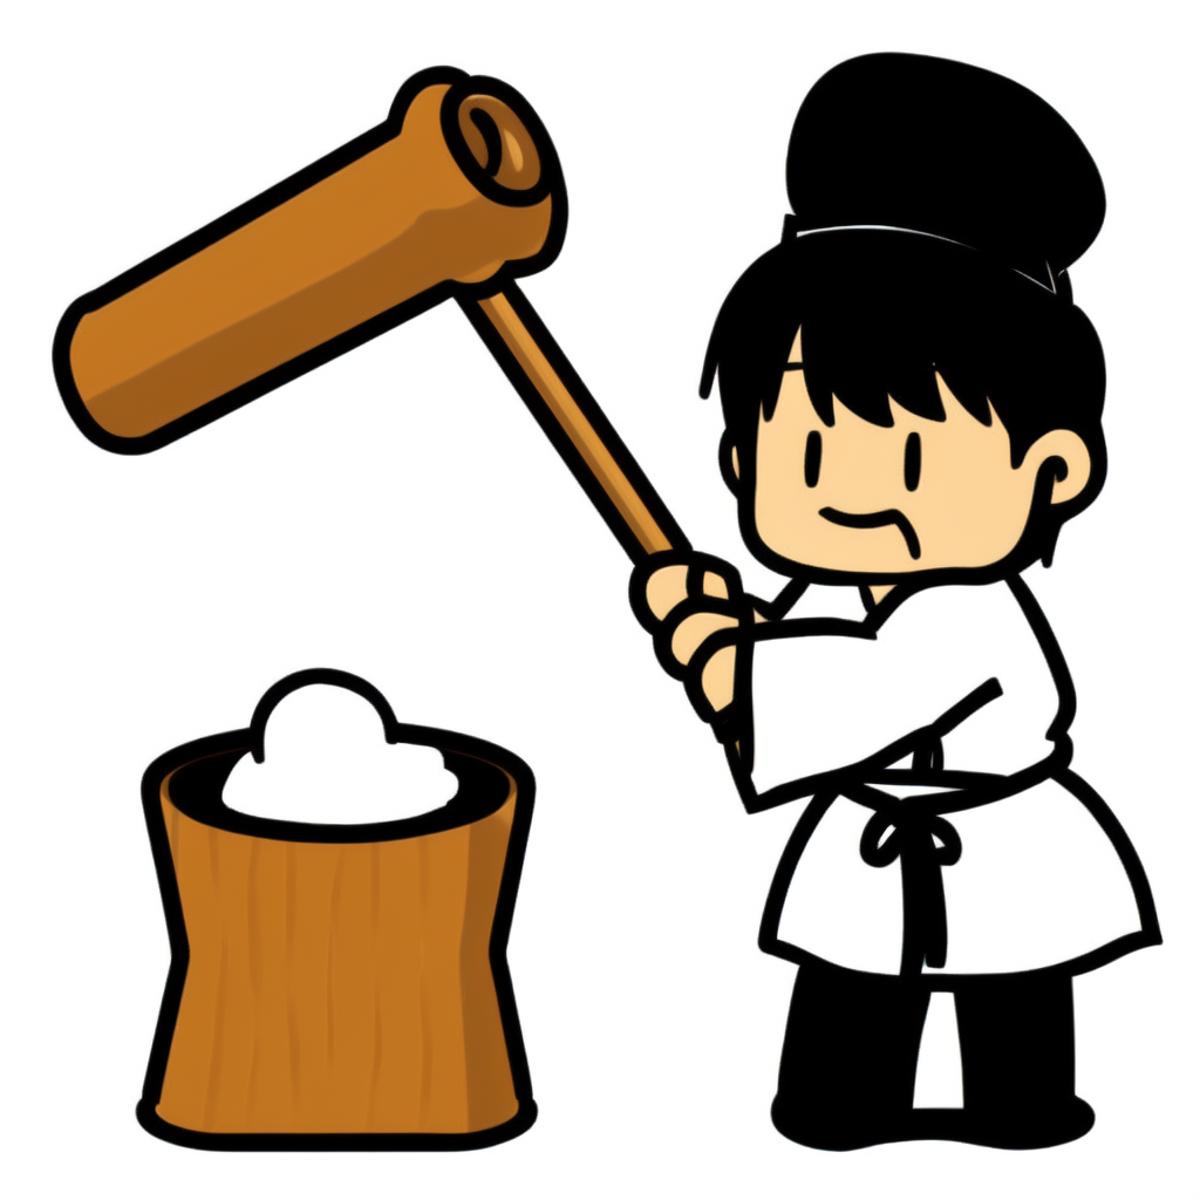 mochi_pounding image by Liquidn2